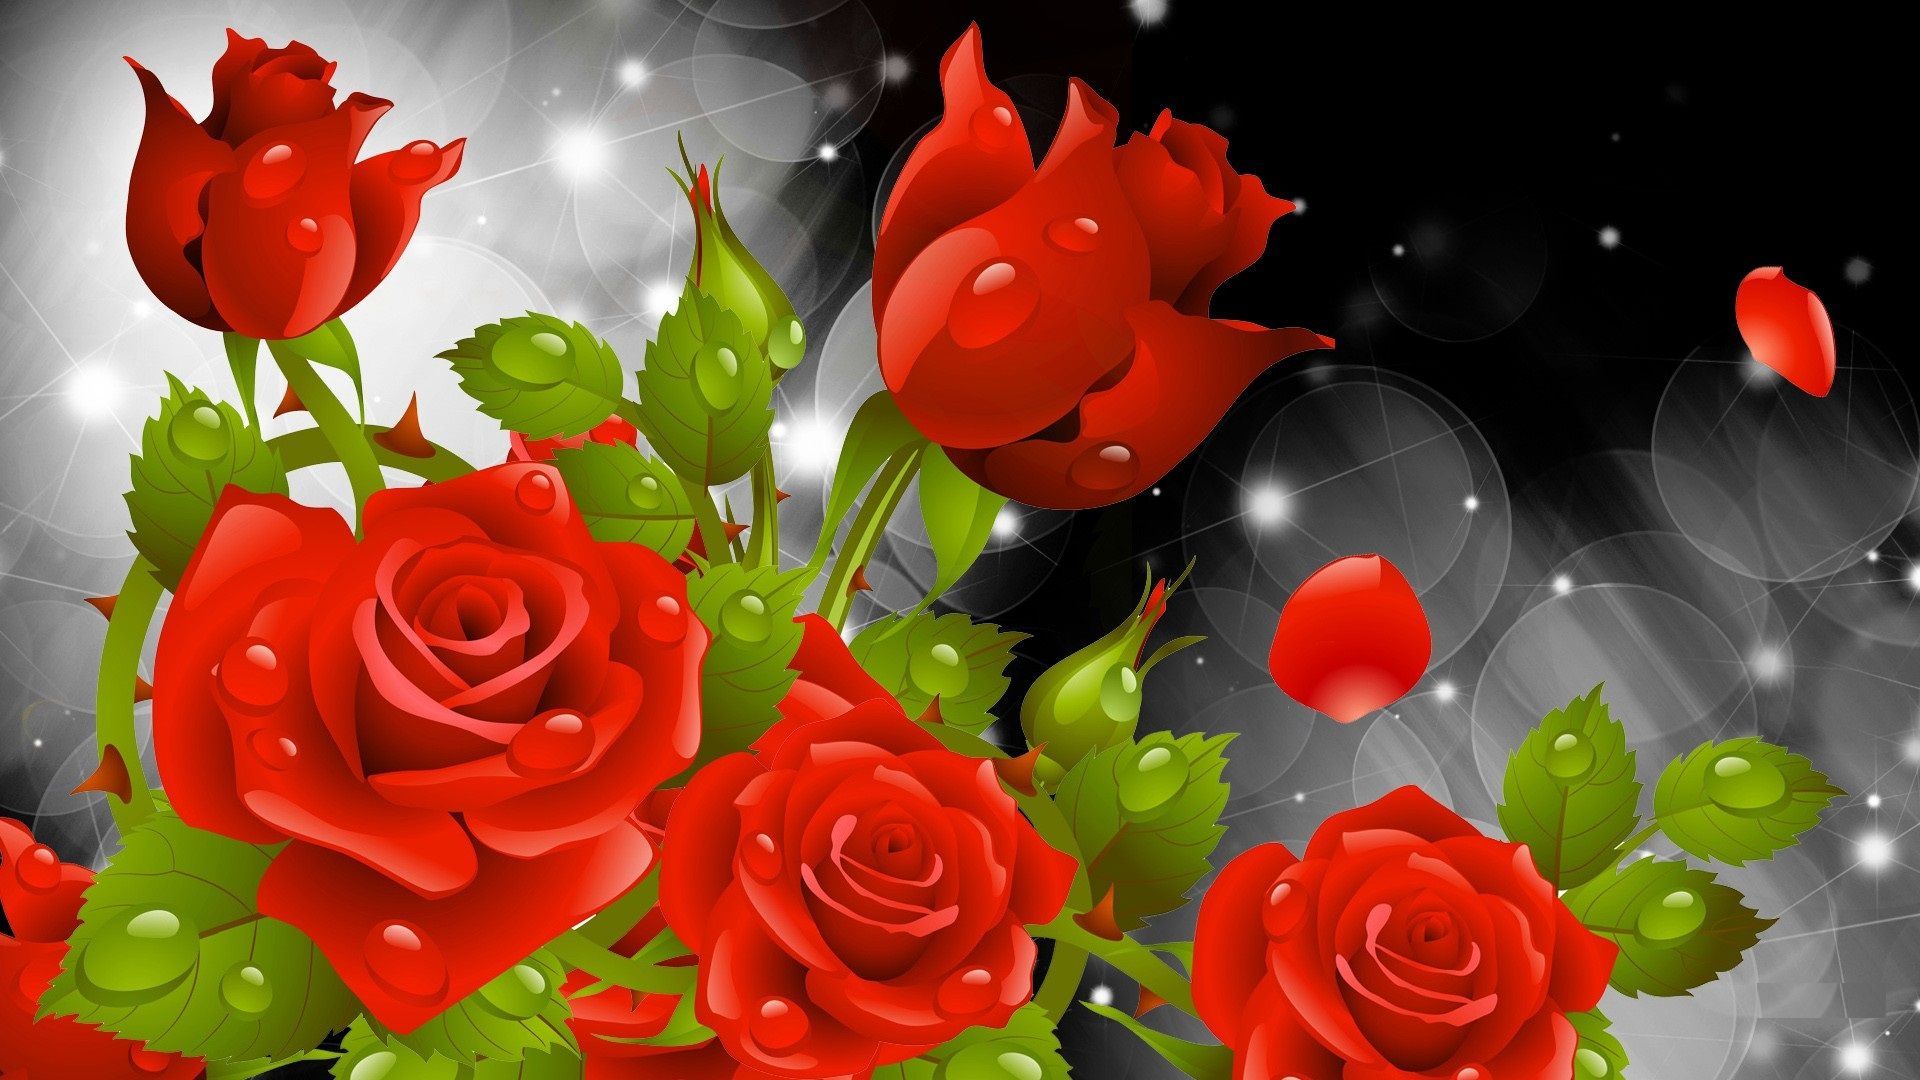 Rose Flowers HD Wallpaper Pictures On Greepx